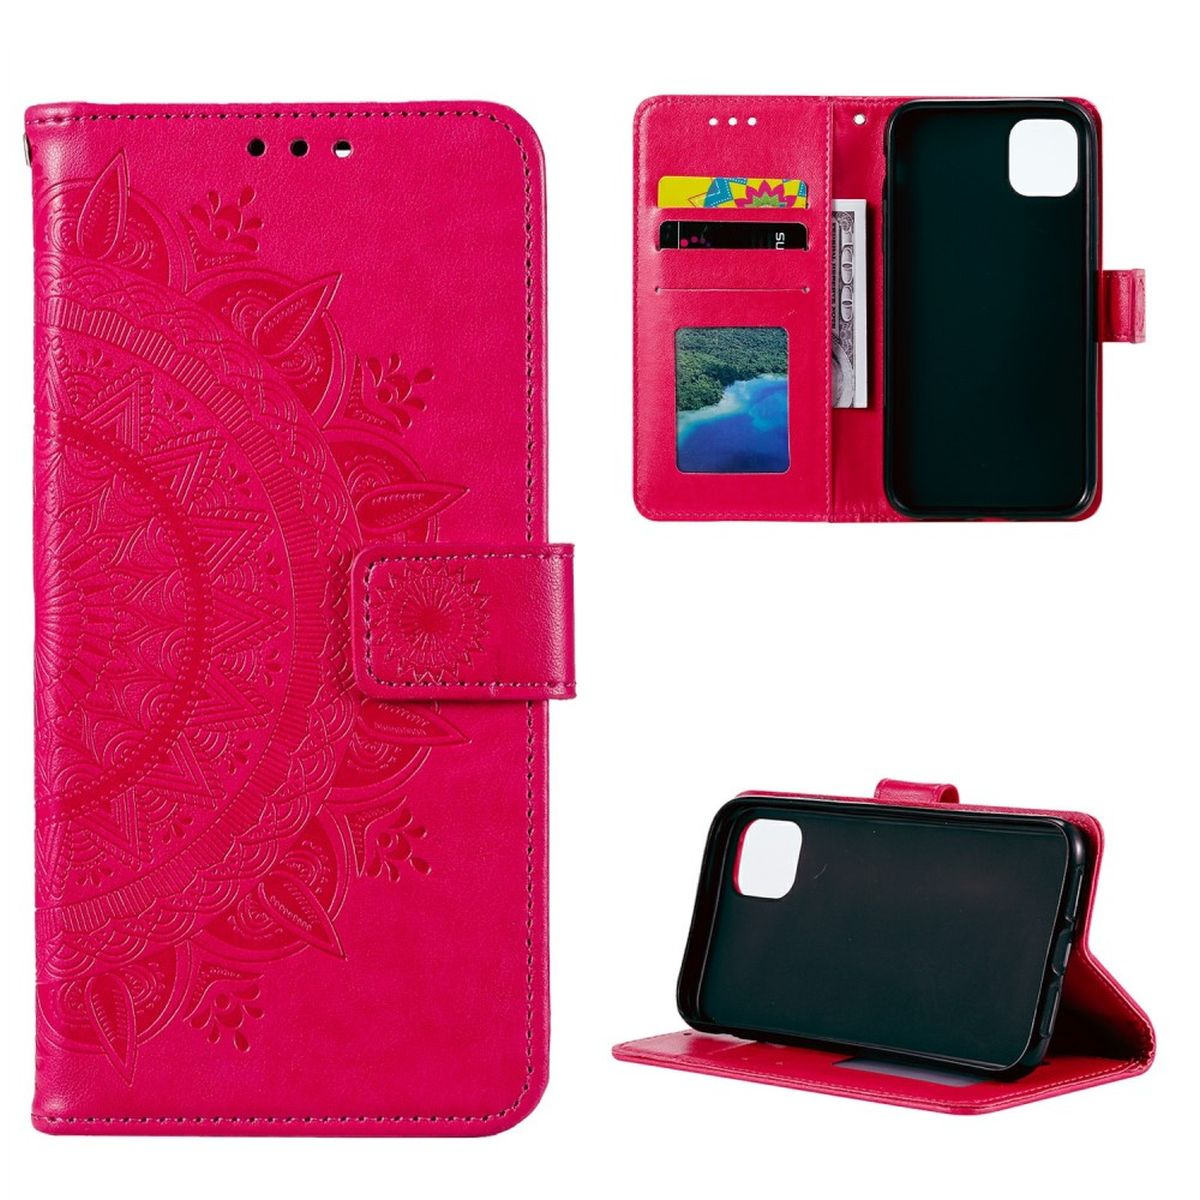 COVERKINGZ Klapphülle mit Mandala A03, Pink Muster, Galaxy Samsung, Bookcover